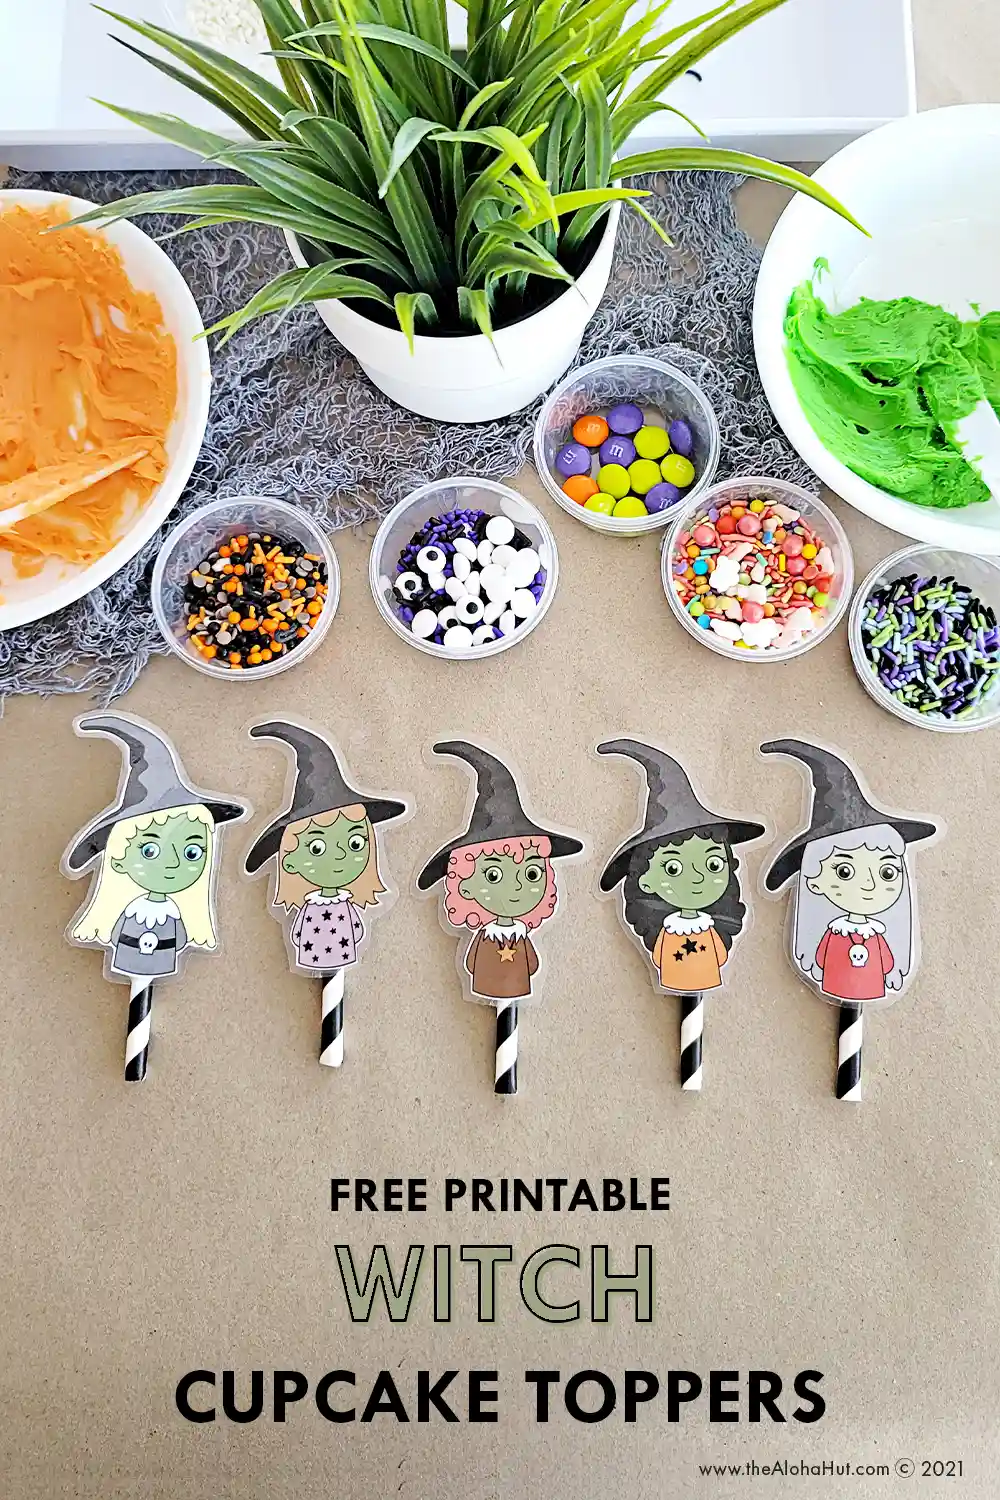 Decorate Cupcake Witch Dresses - free printable - Halloween Party Ideas